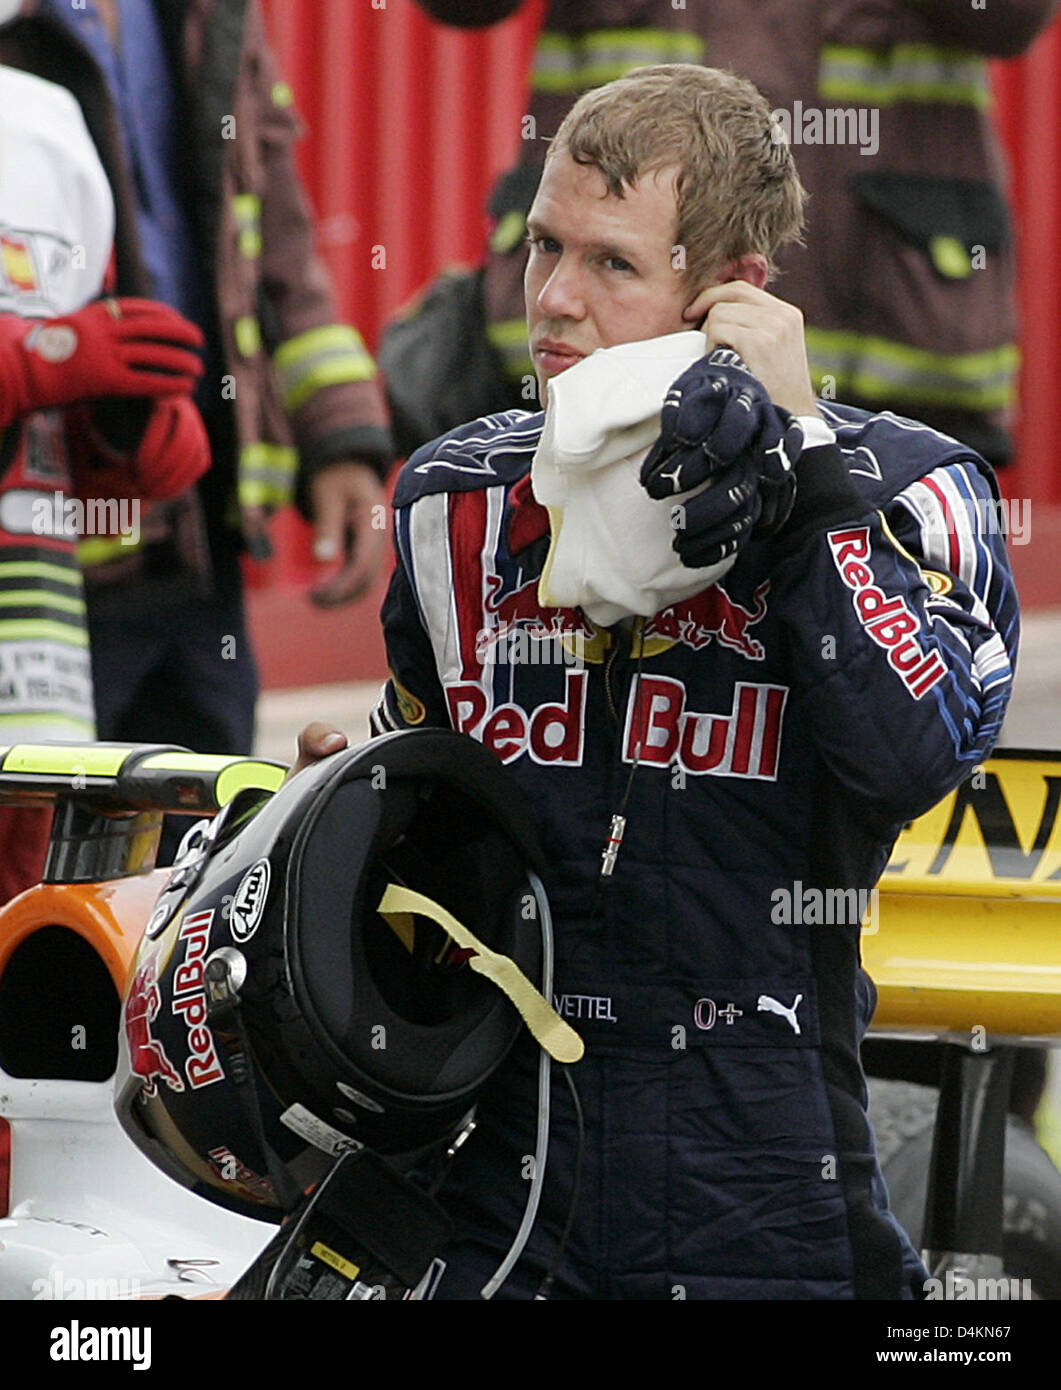 German Formula One driver Sebastian Vettel of Red Bull Racing walks through the parc ferme after the Formula One Grand Prix of Spain at Circuit de Catalunya in Montmelo near Barcelona, Spain, 10 May 2009. Vettel finished fourth. Photo: Felix Heyder Stock Photo